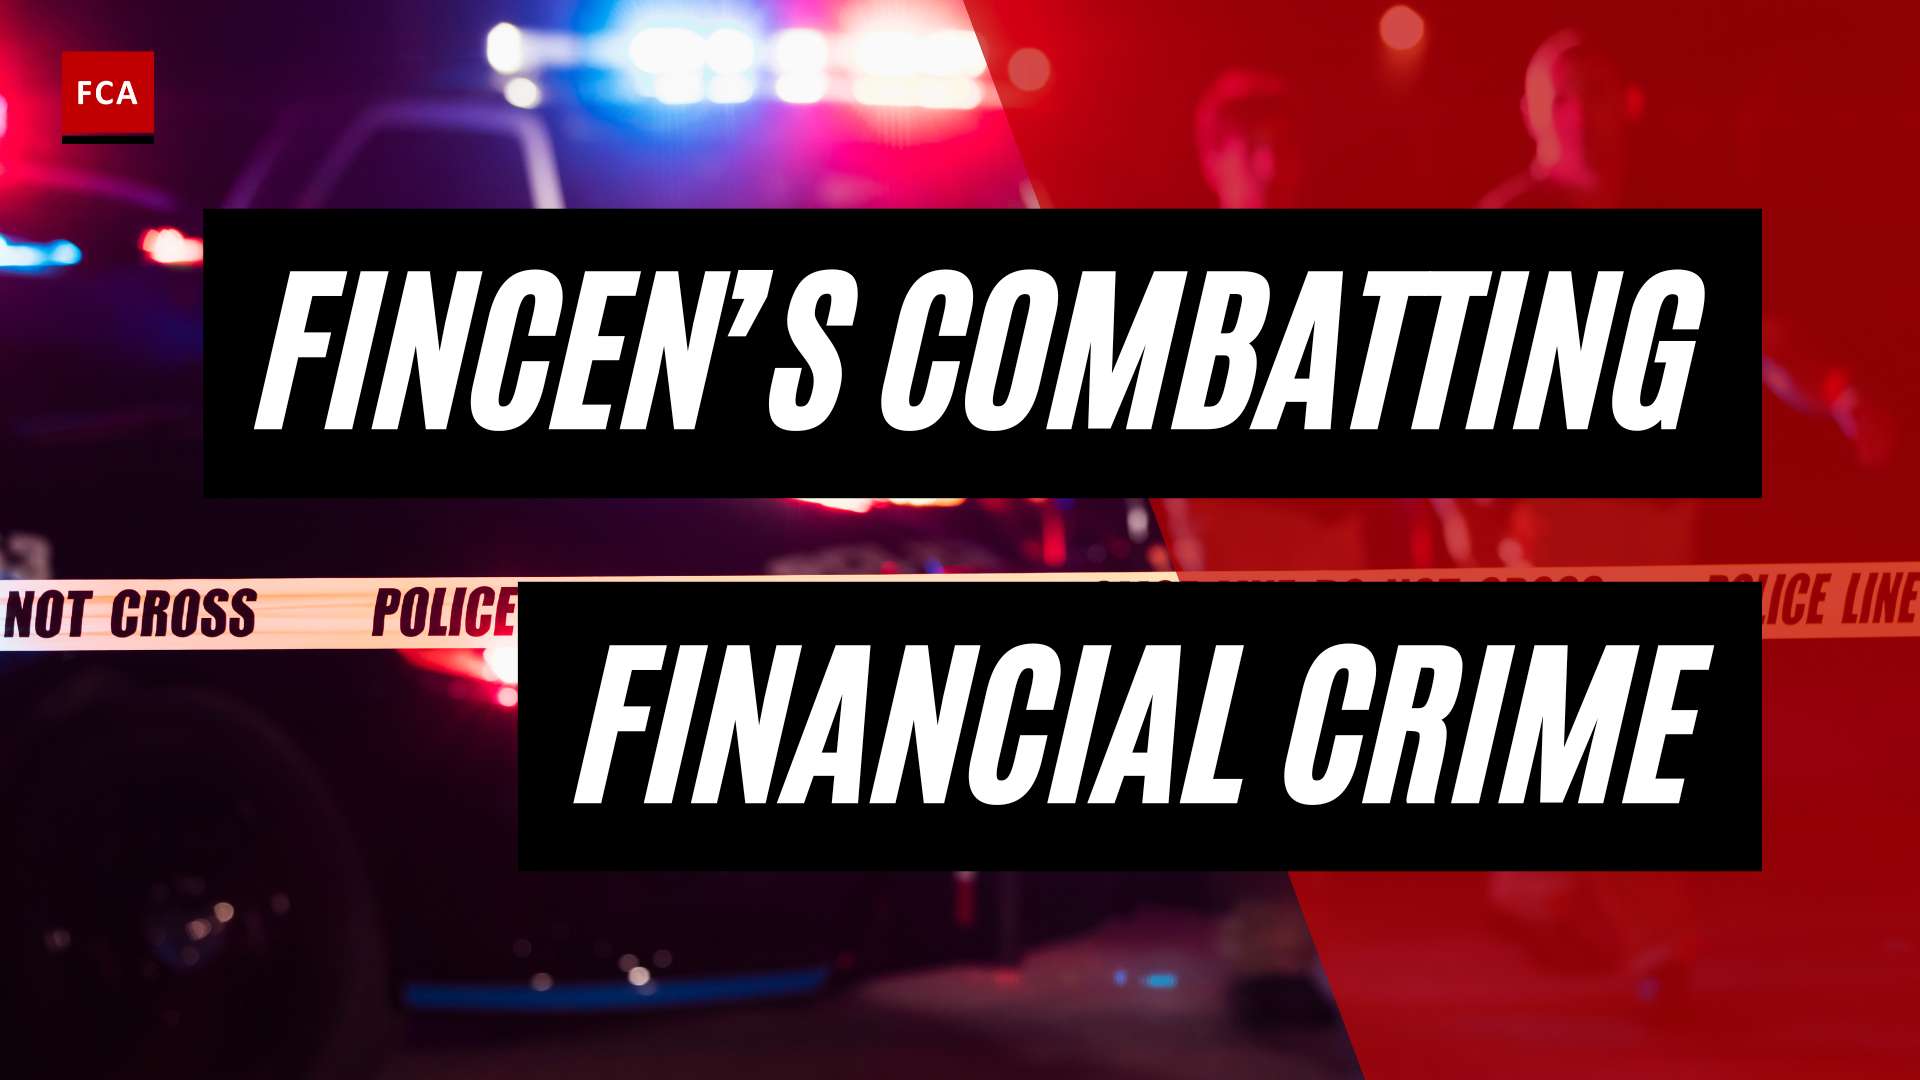 The Power Of Oversight: Fincens Battle Against Financial Crimes